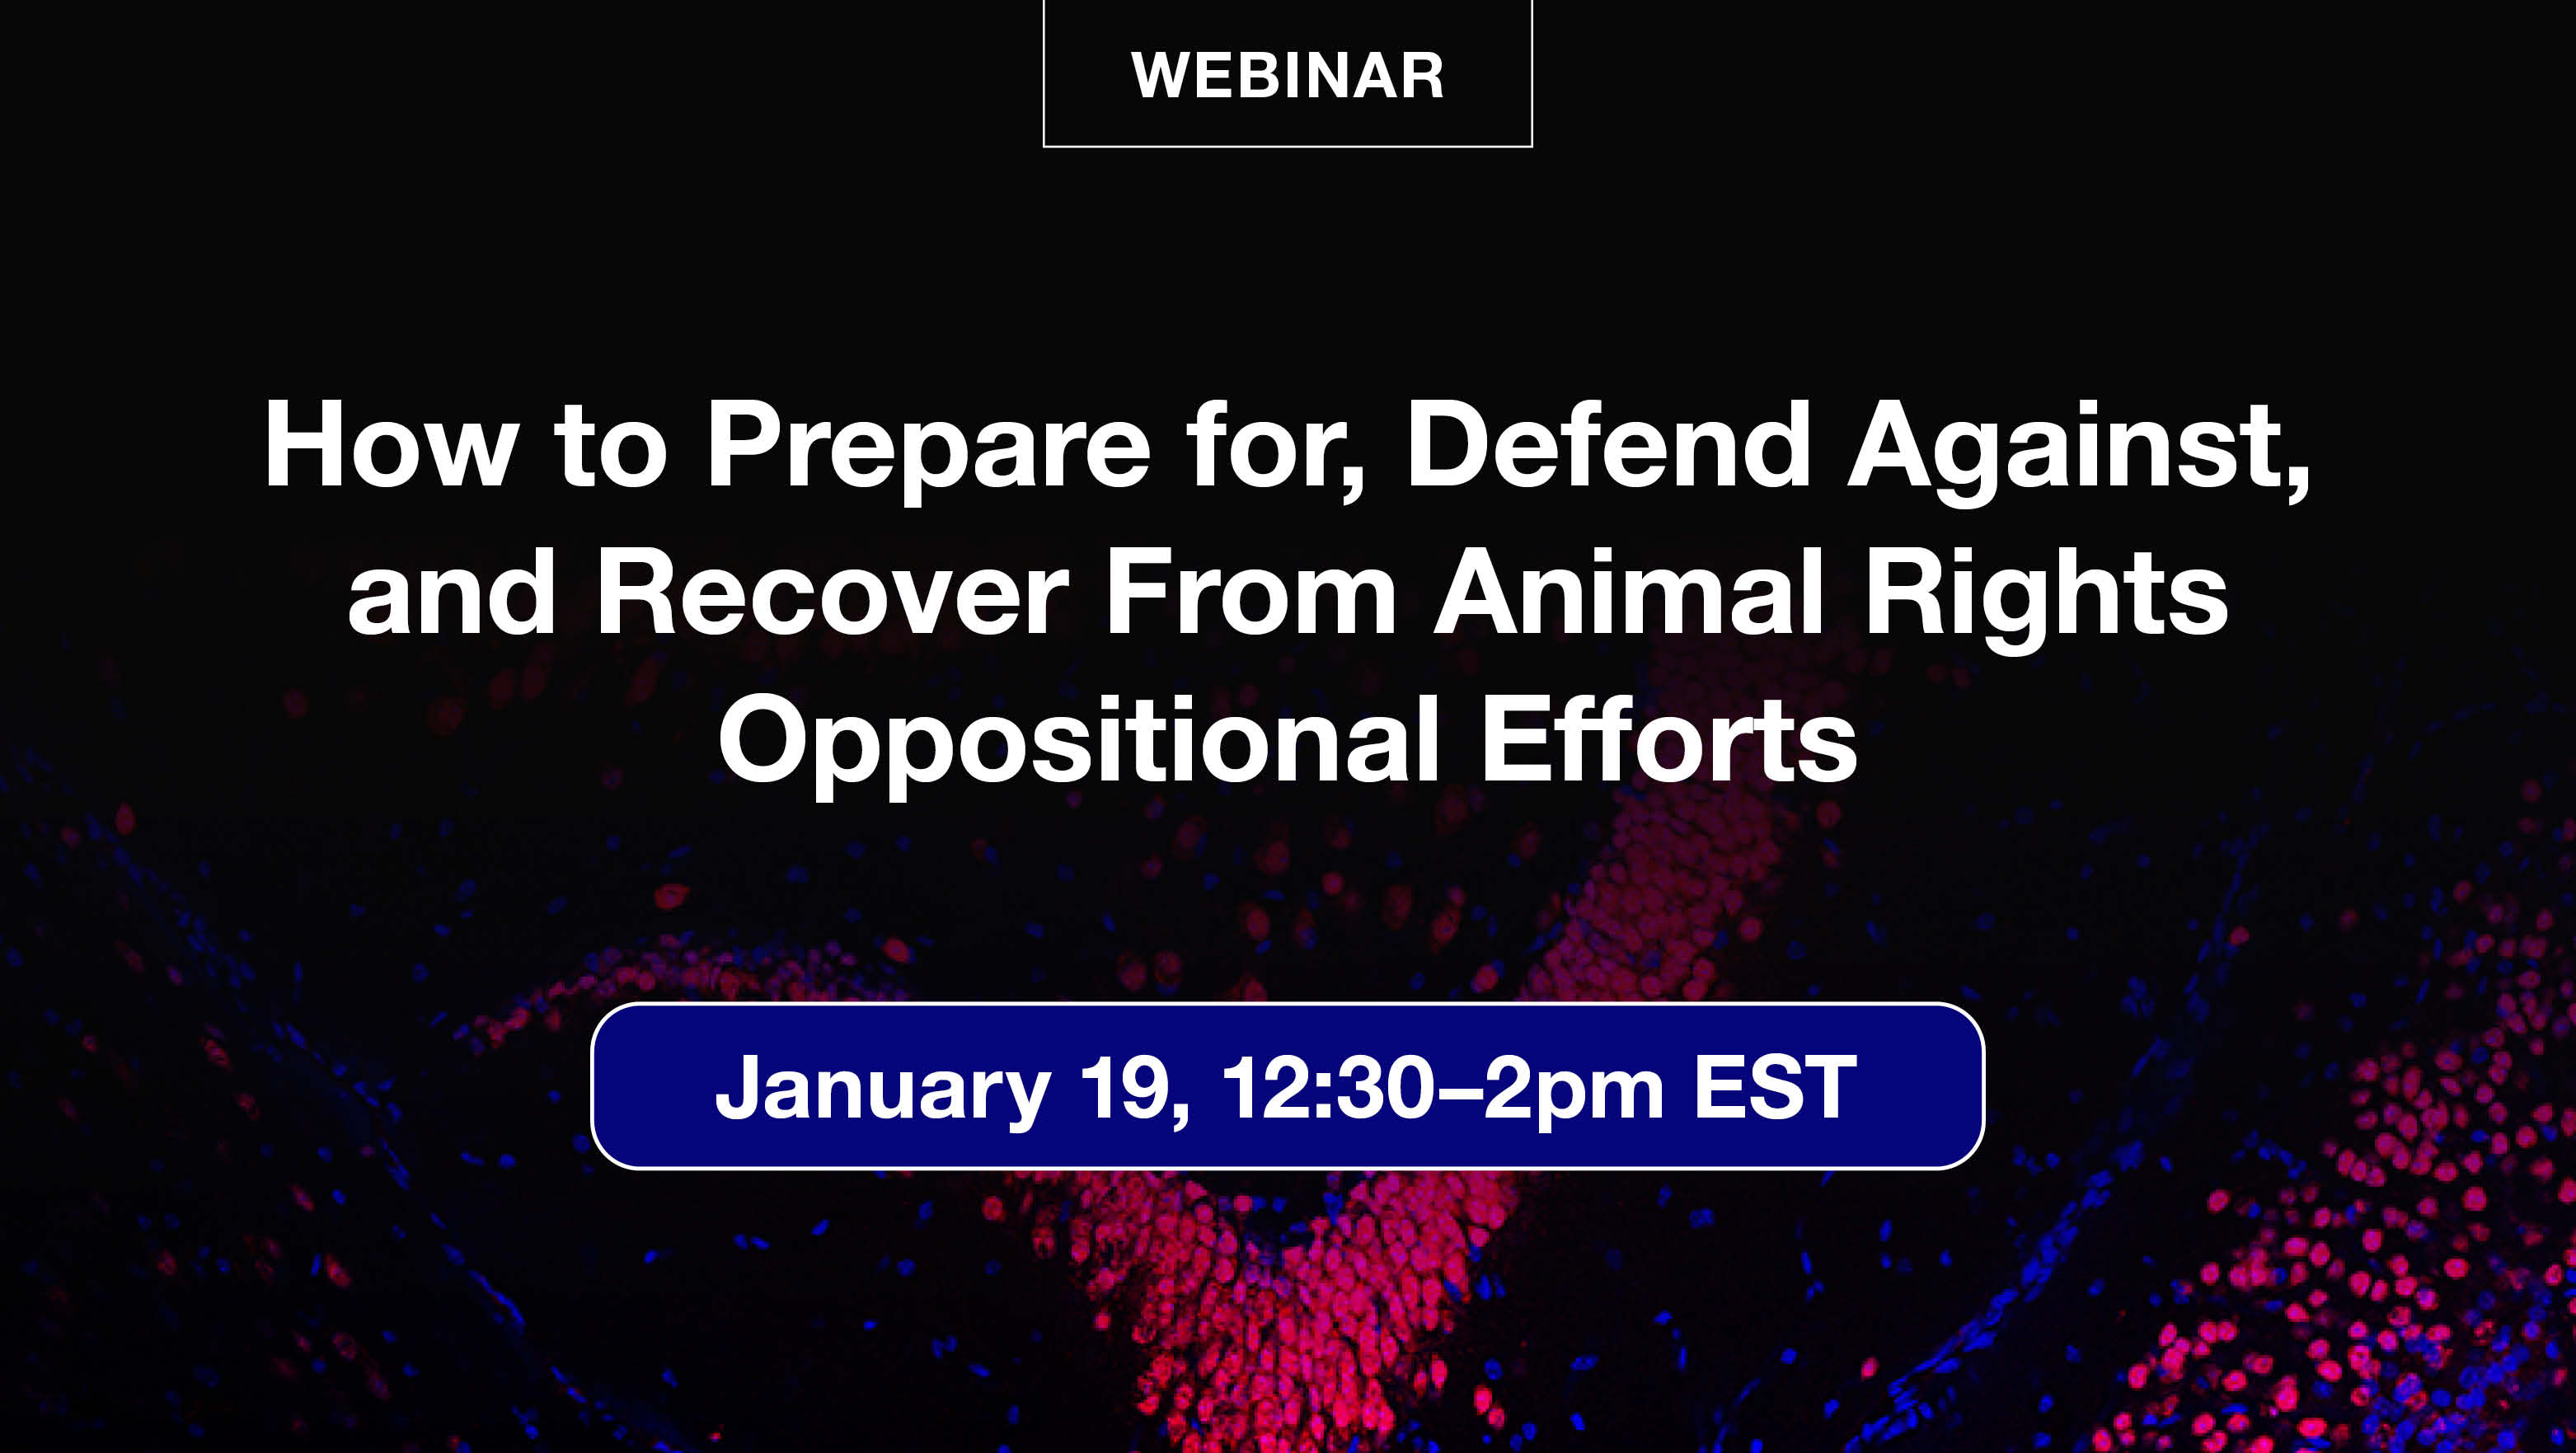 How to prepare for, defend against and recover from animal rights oppositional efforts. January 19, 12:30 to 2 p.m. EST.